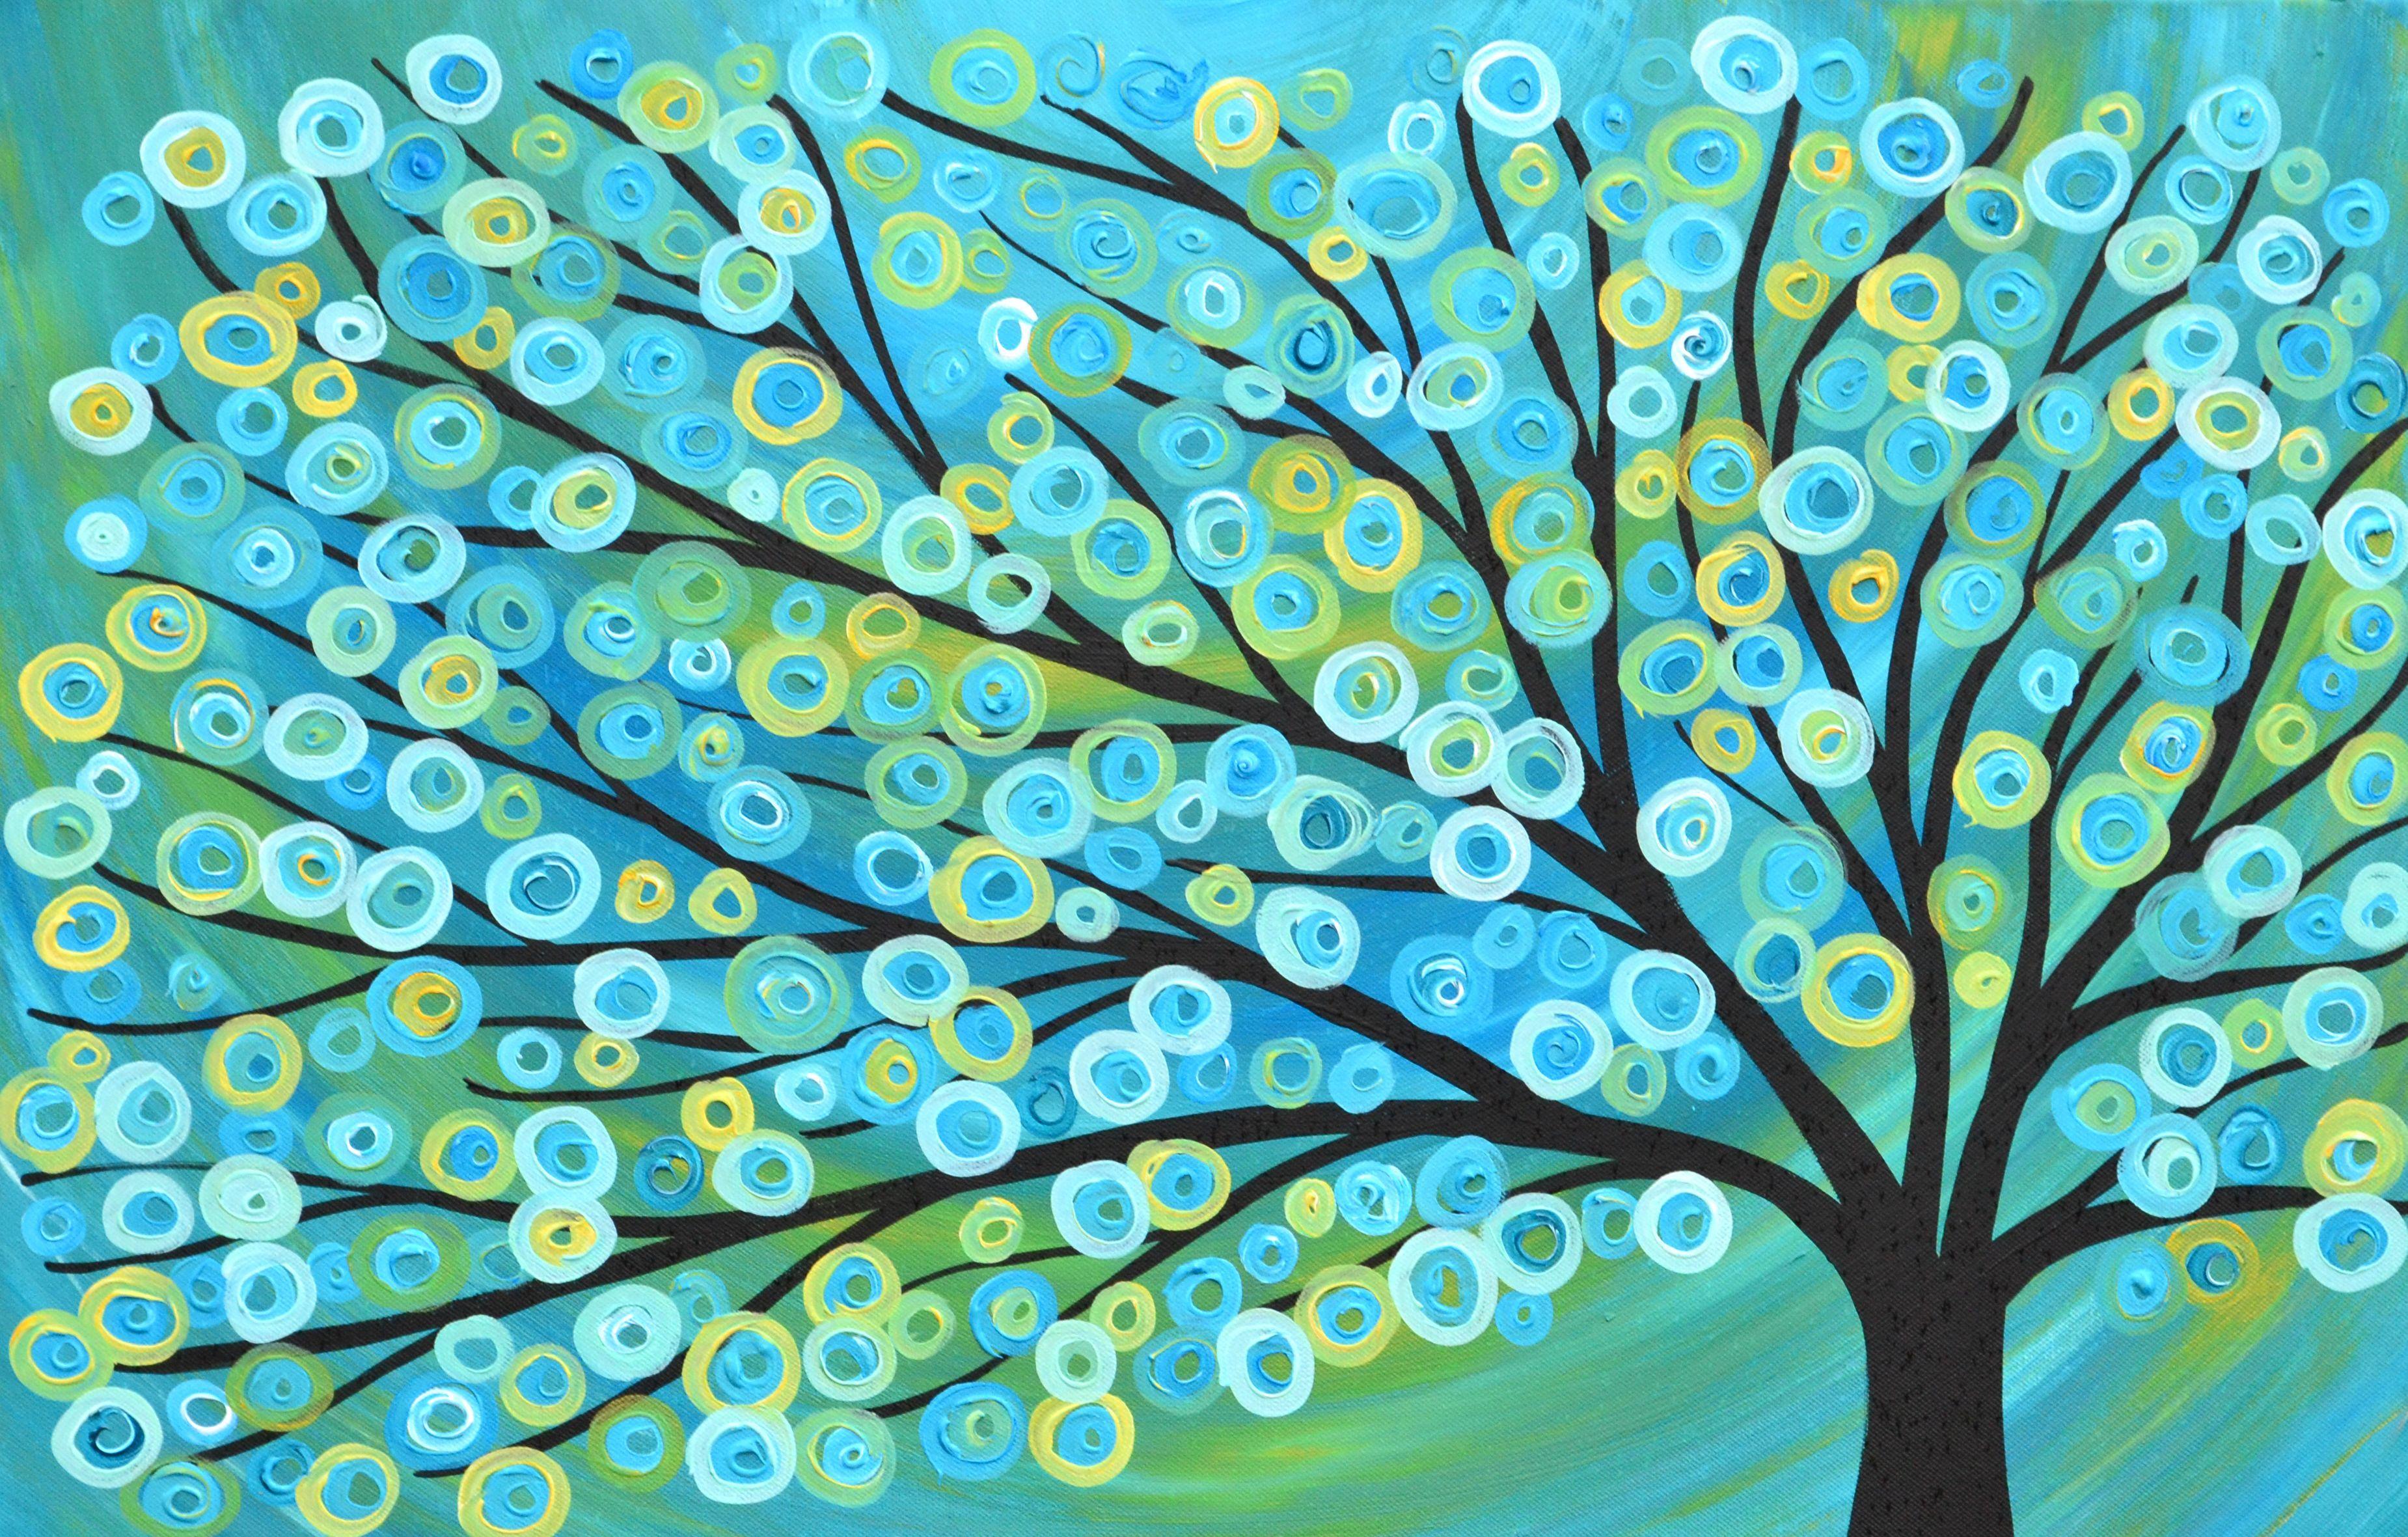 Tree Abstract Art Wallpapers - Top Free Tree Abstract Art Backgrounds